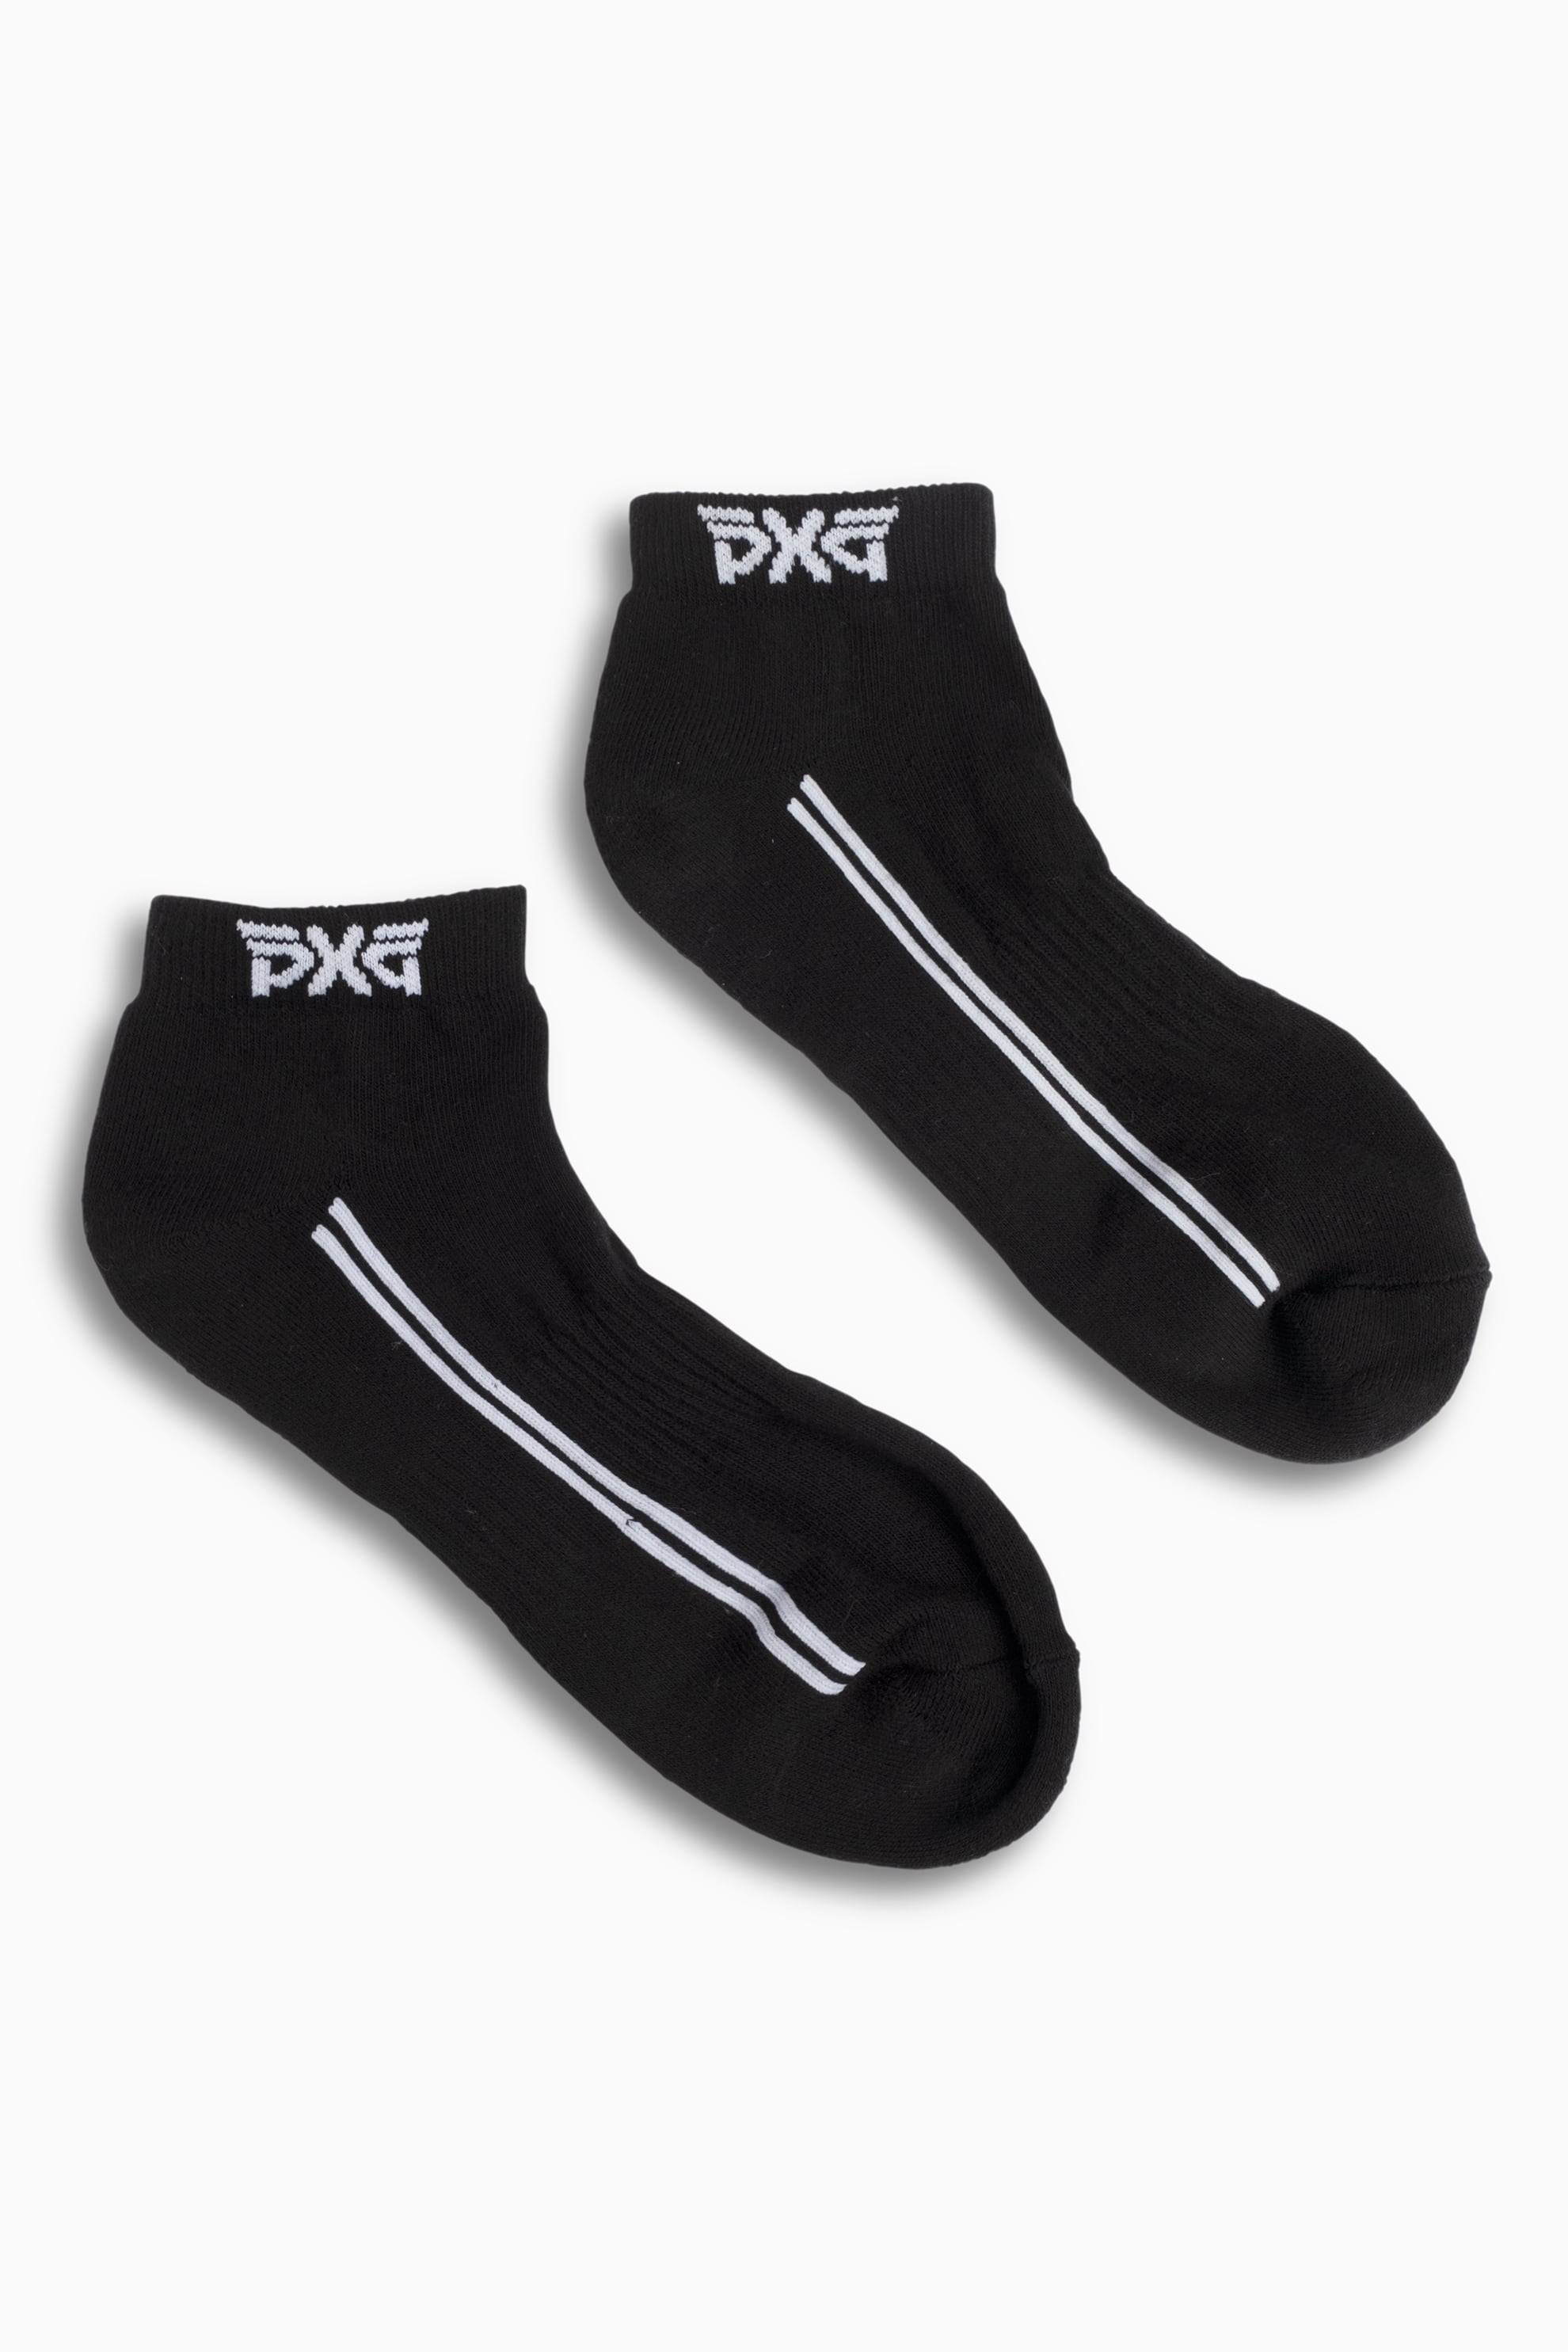 Ankle Socks With Logo LV At Front White/Black/Grey/Dark Grey - 5 Pairs